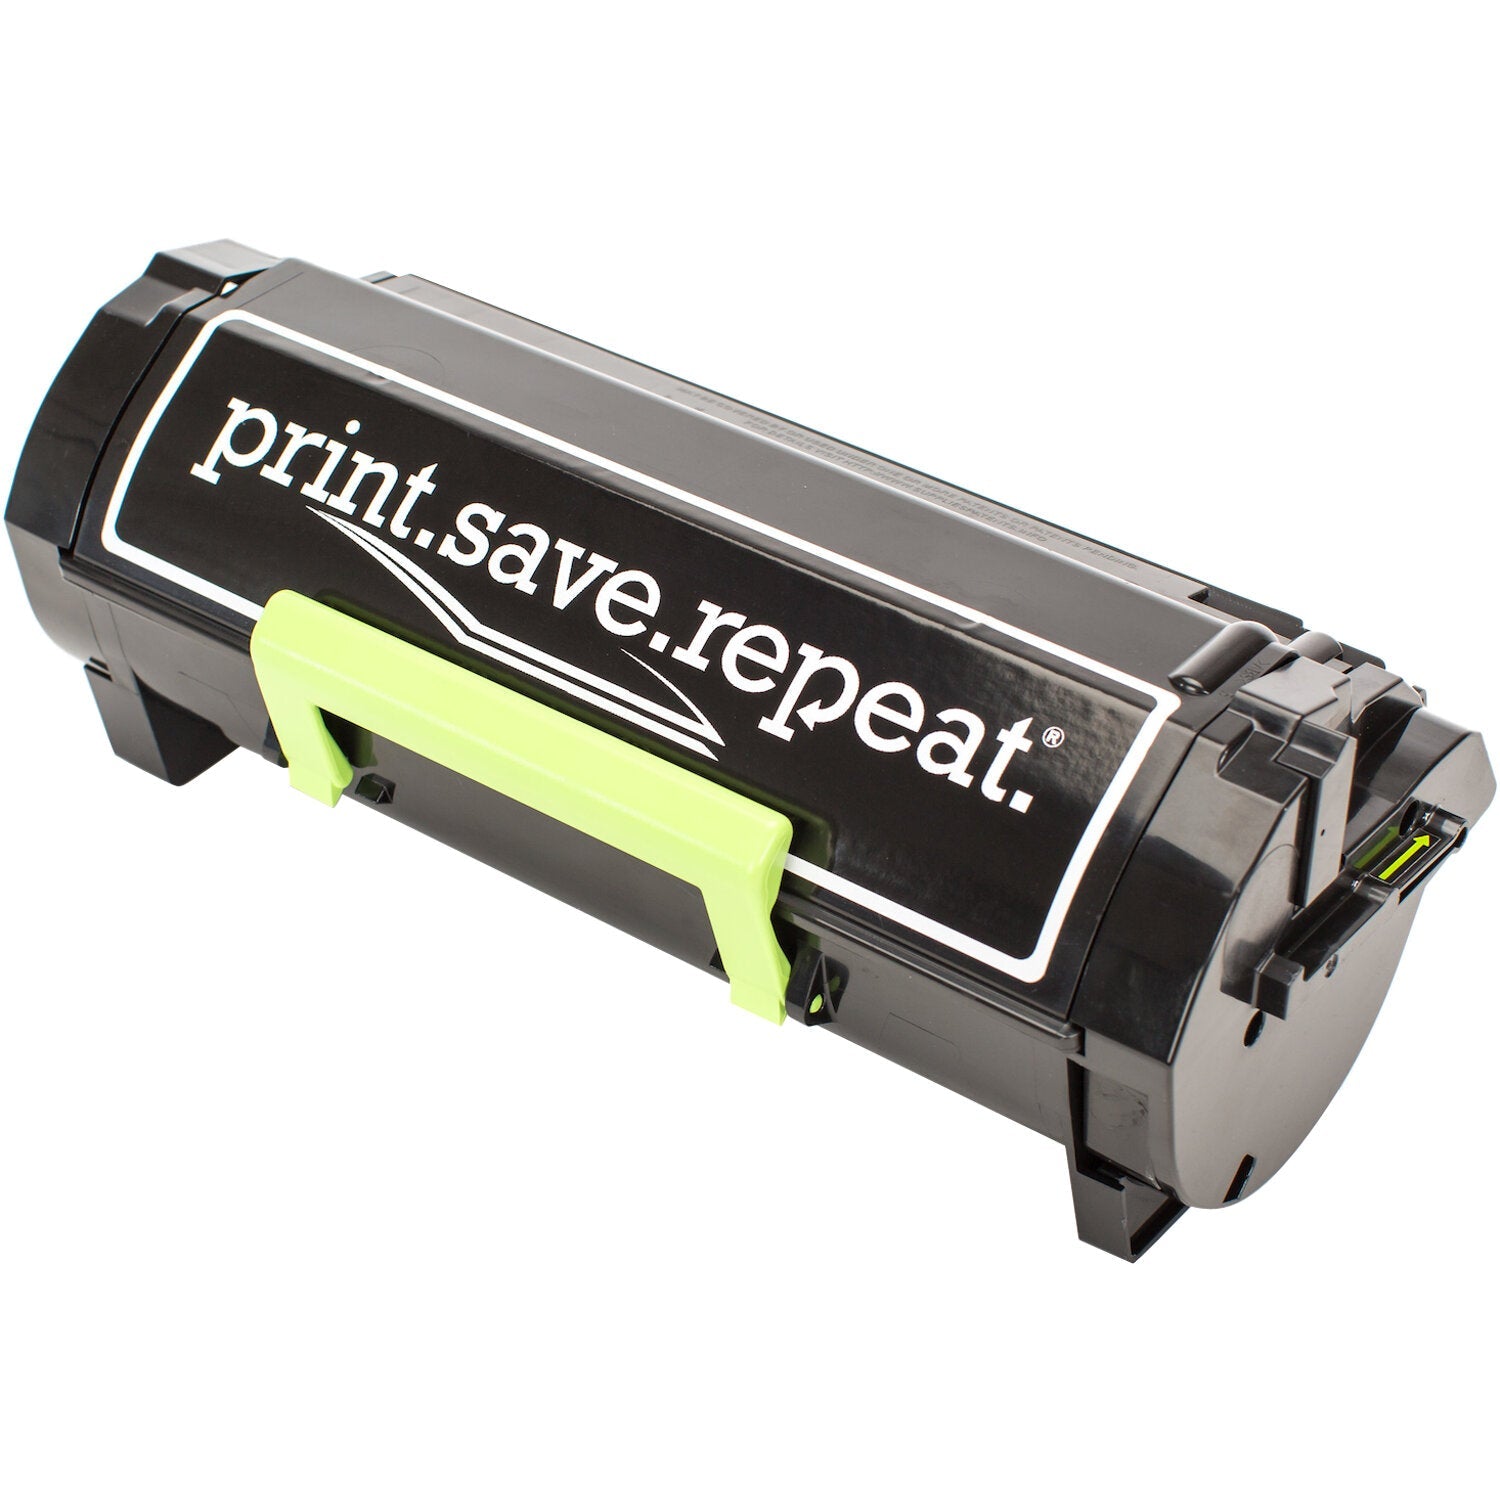 Print.Save.Repeat. Lexmark B241H00 High Yield Remanufactured Toner Cartridge for B2442, B2546, B2650, MB2442, MB2546, MB2650 [6,000 Pages]